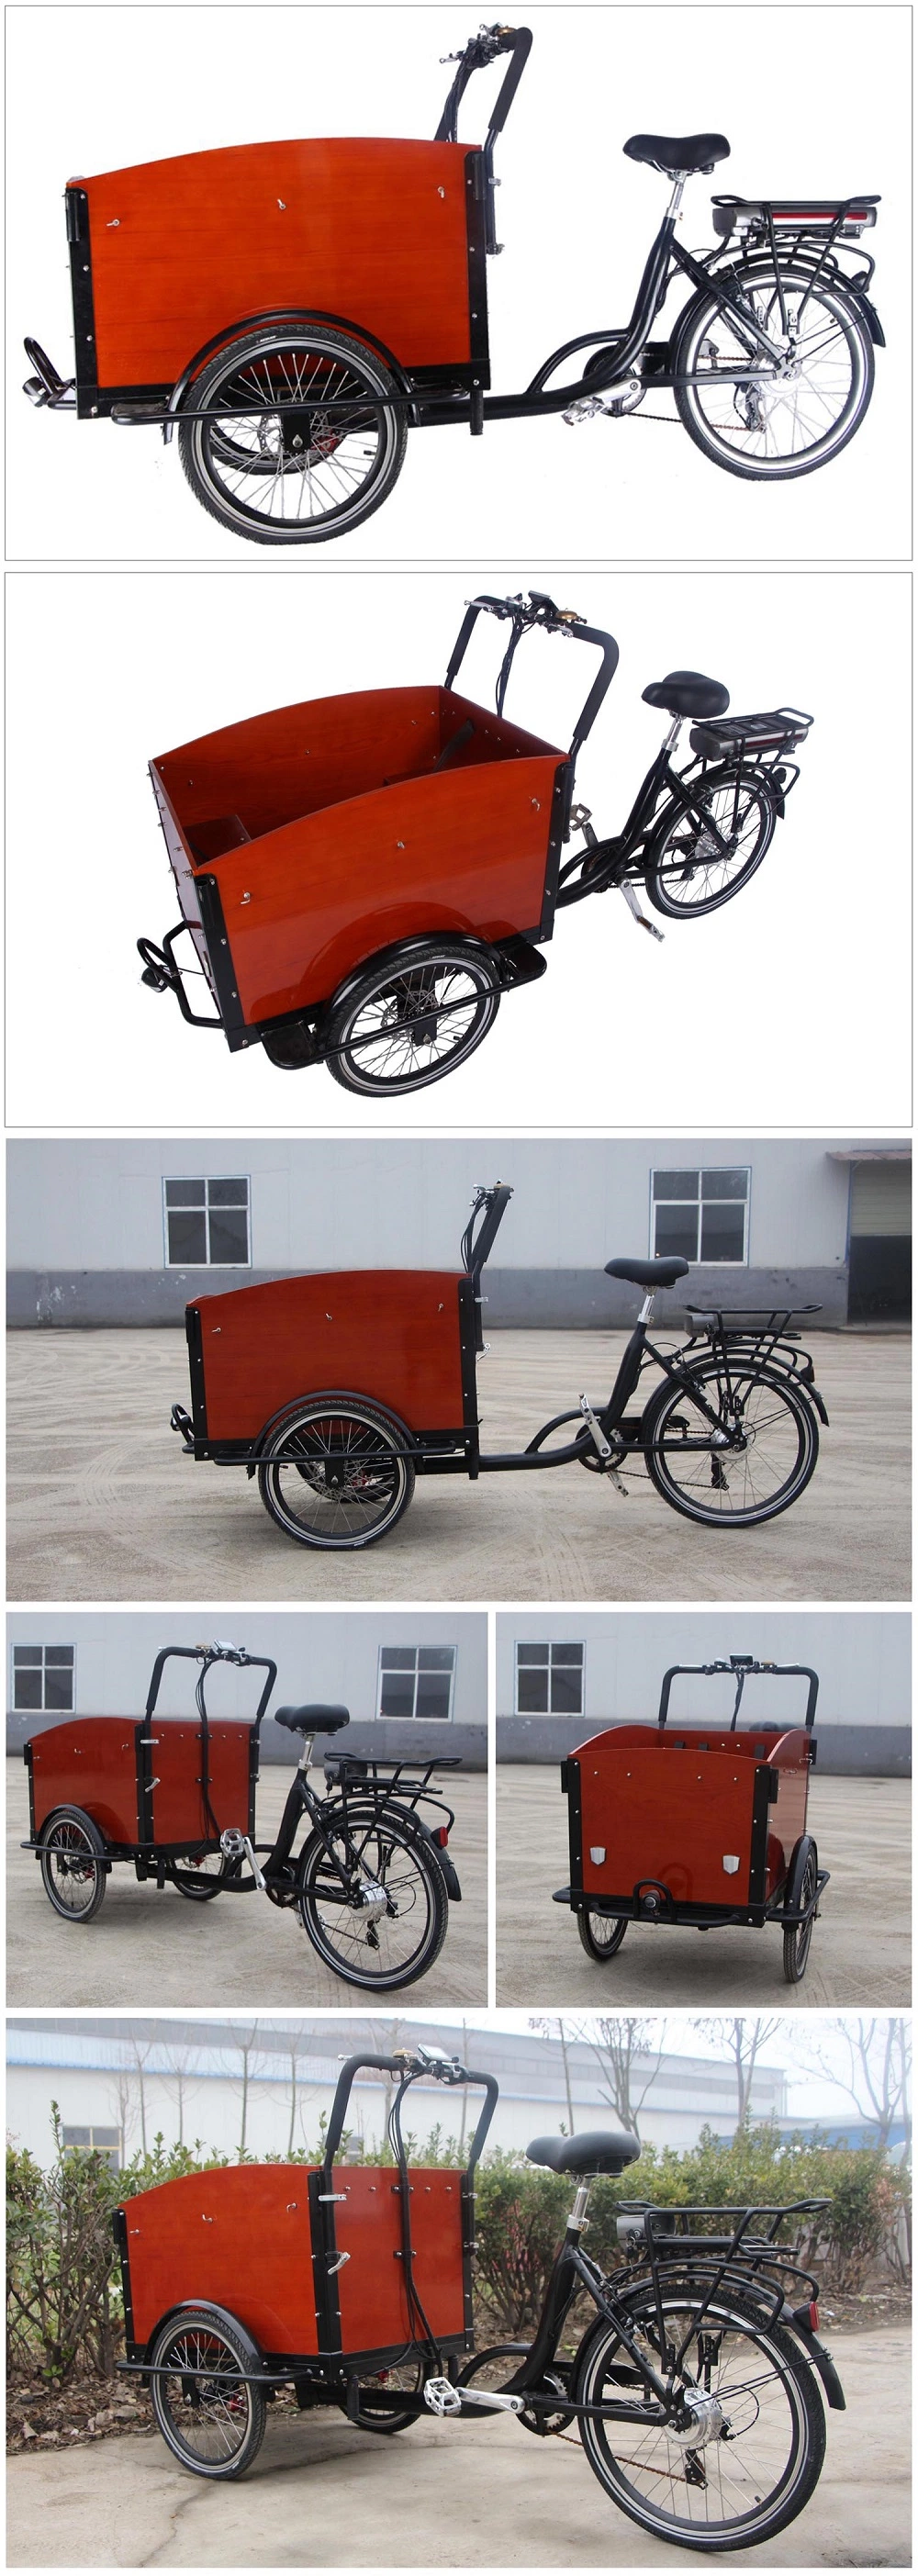 3 Wheels Pedal Electric Cargo Bike Dutch Adult Tricycle Family Bicycle Street Kids Scooter for Sale Customizable